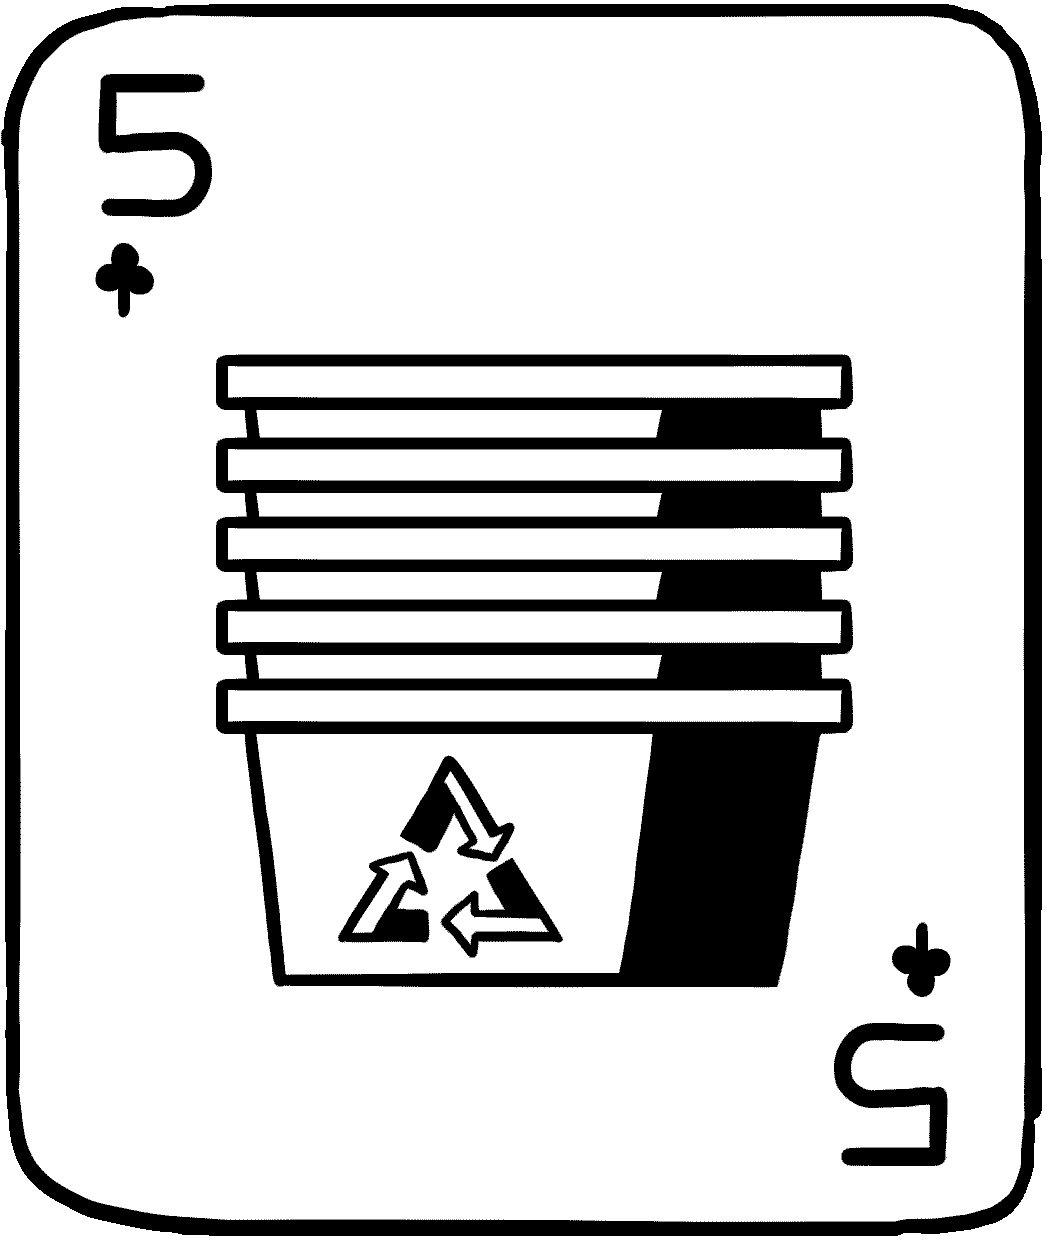 A five of spades with recycling bins on the front